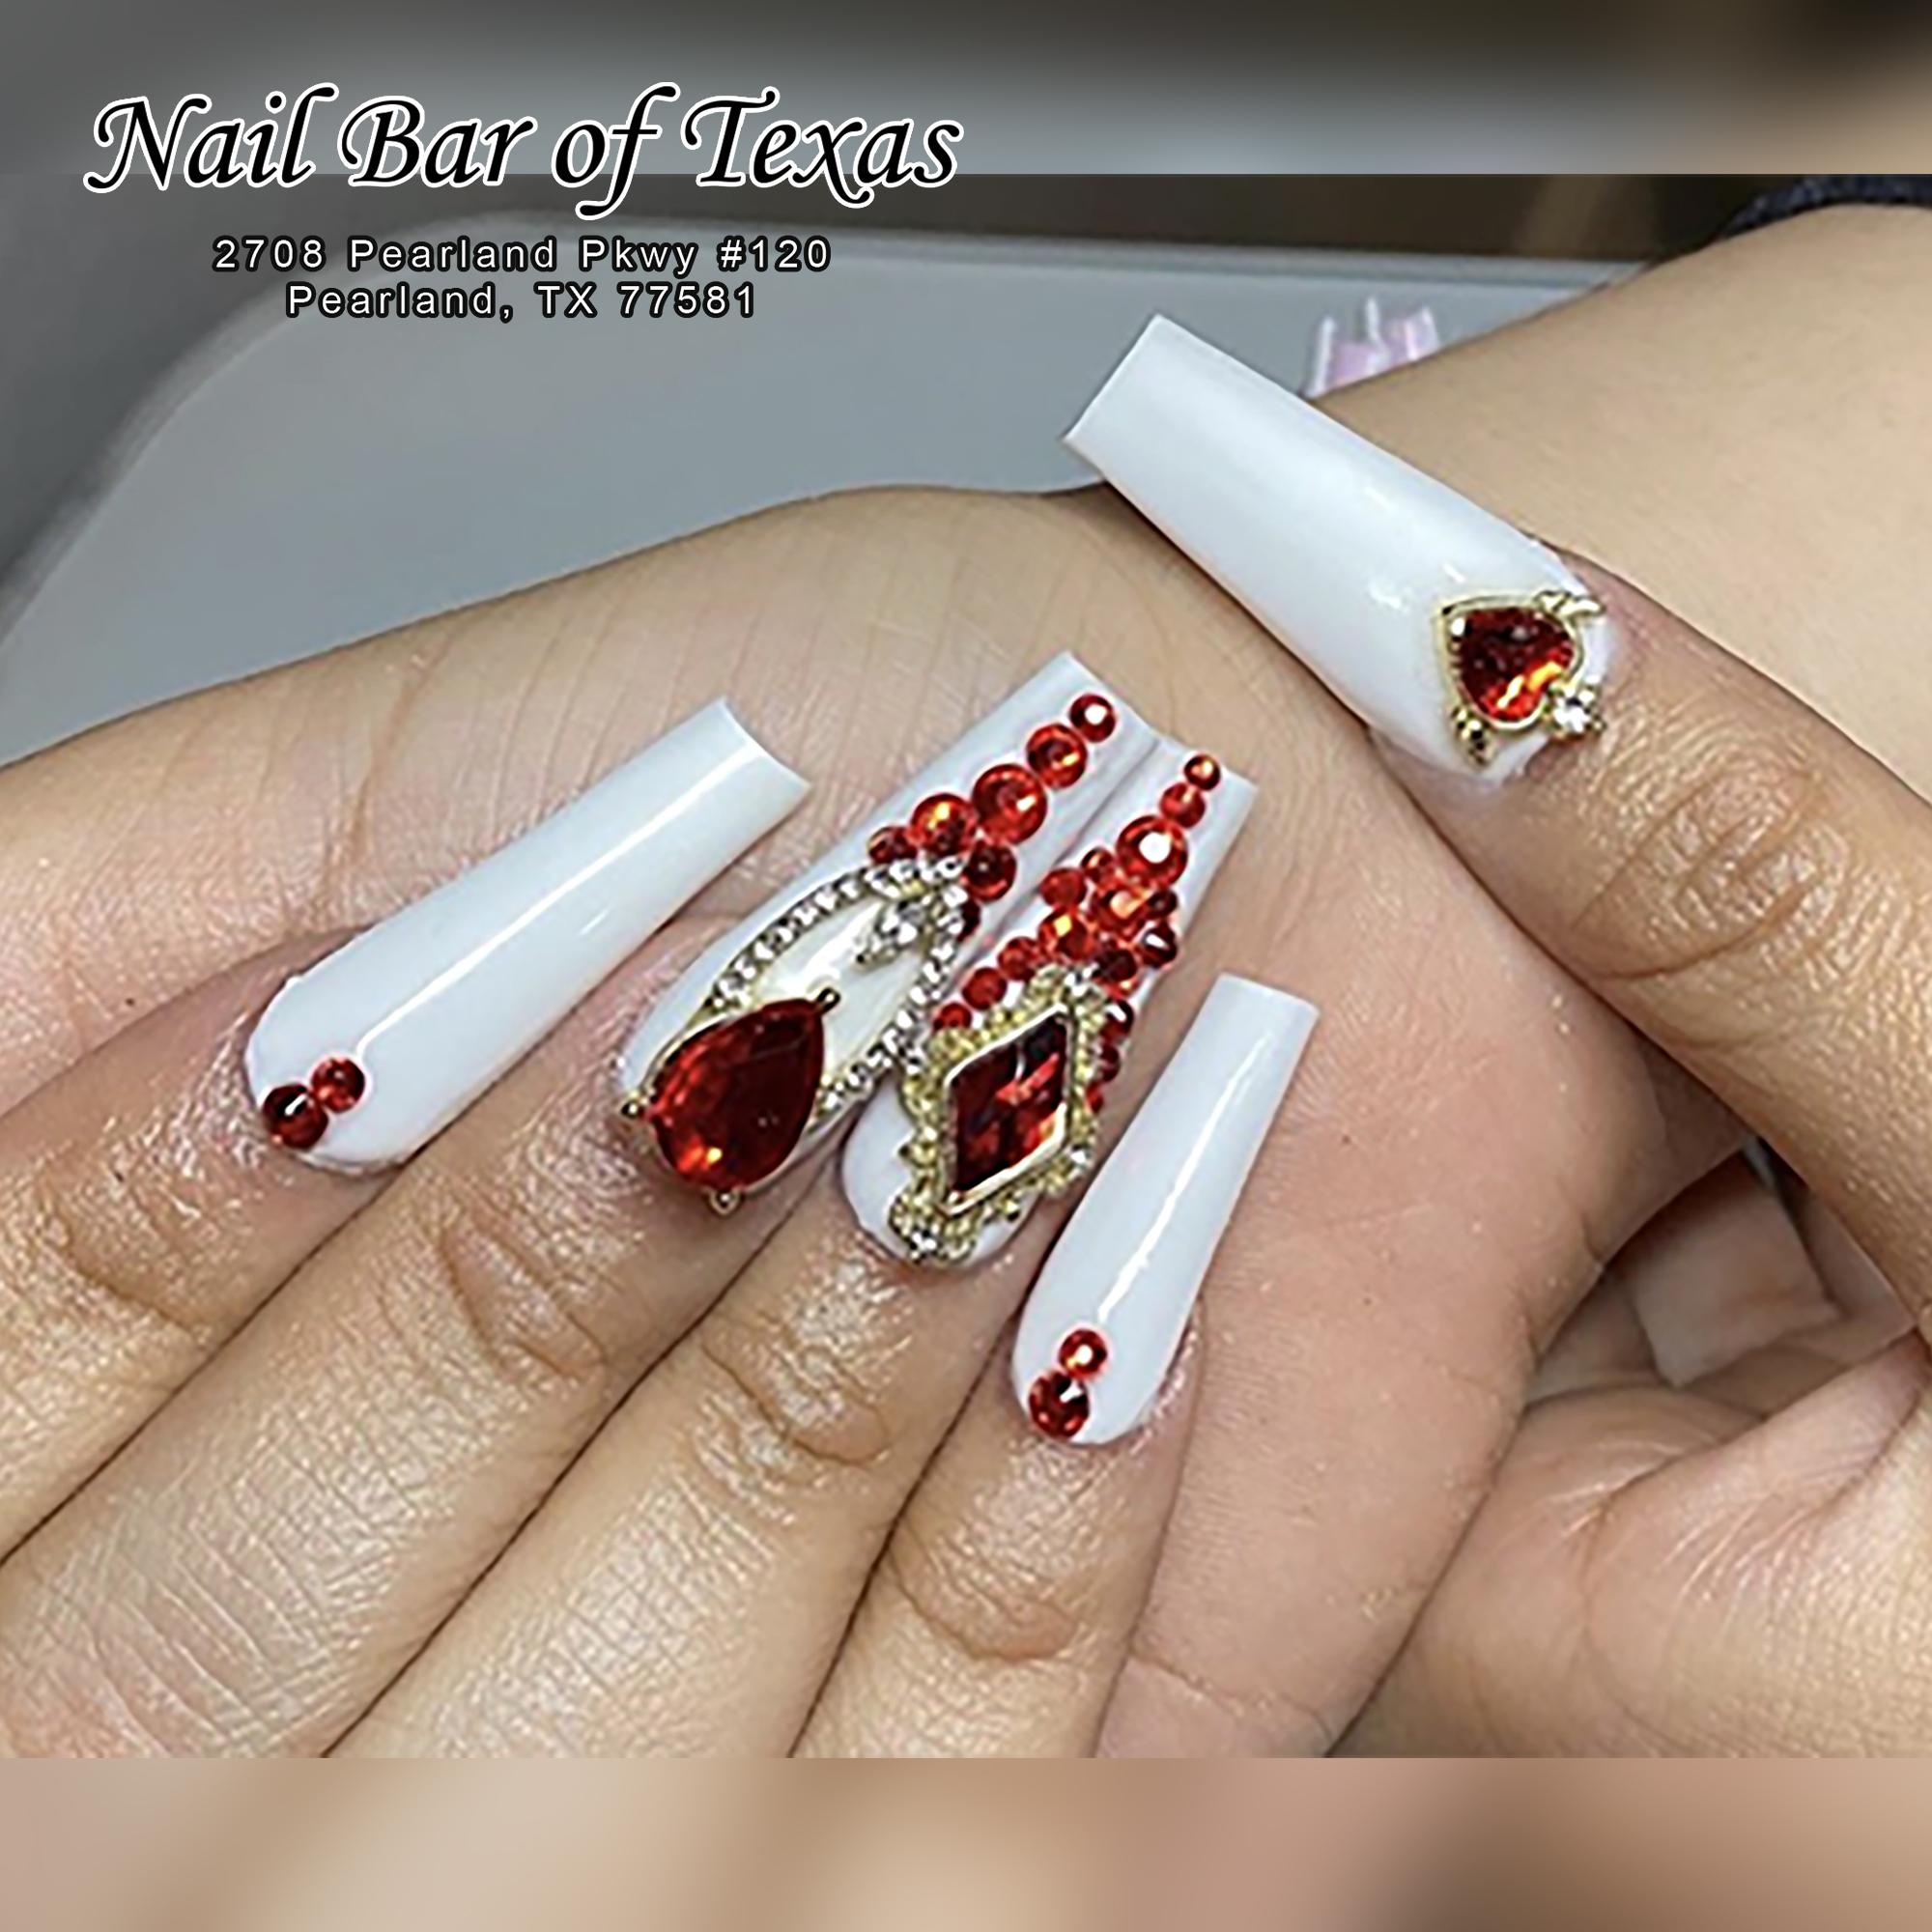 It’s time to get artistic with your nails – Top nail care salon near Pearland, TX 77581